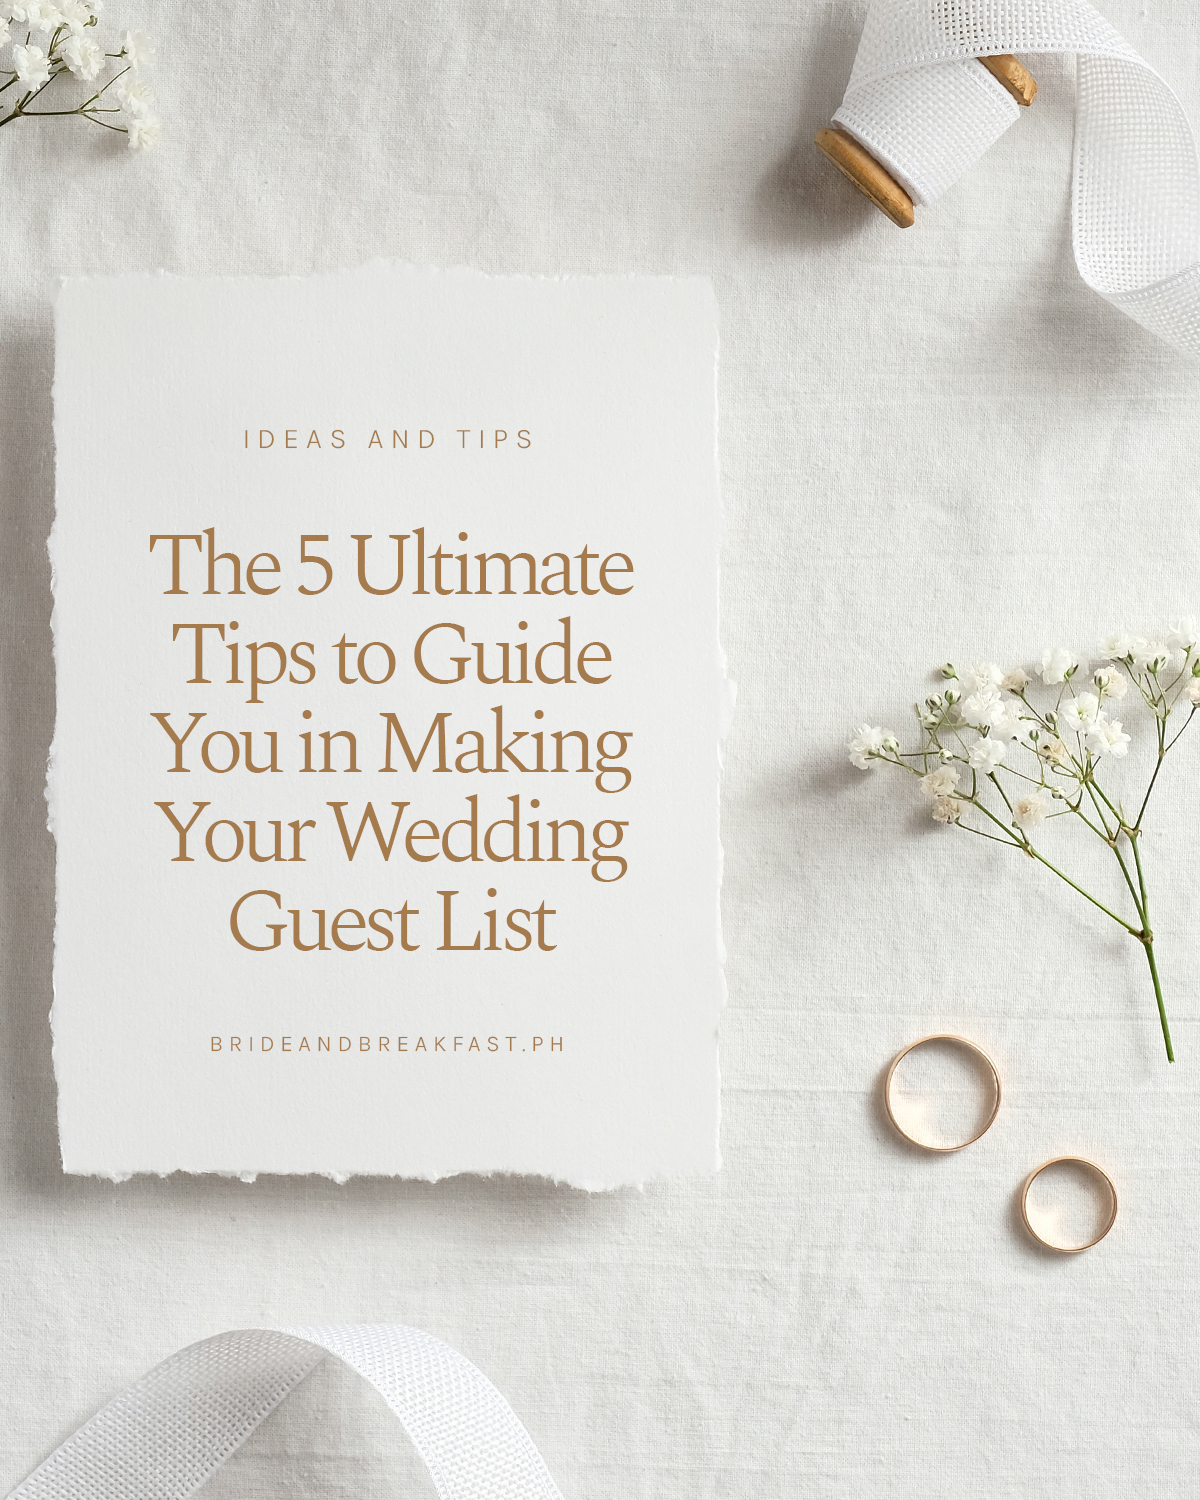 The 5 Ultimate Tips to Guide You in Making Your Wedding Guest List